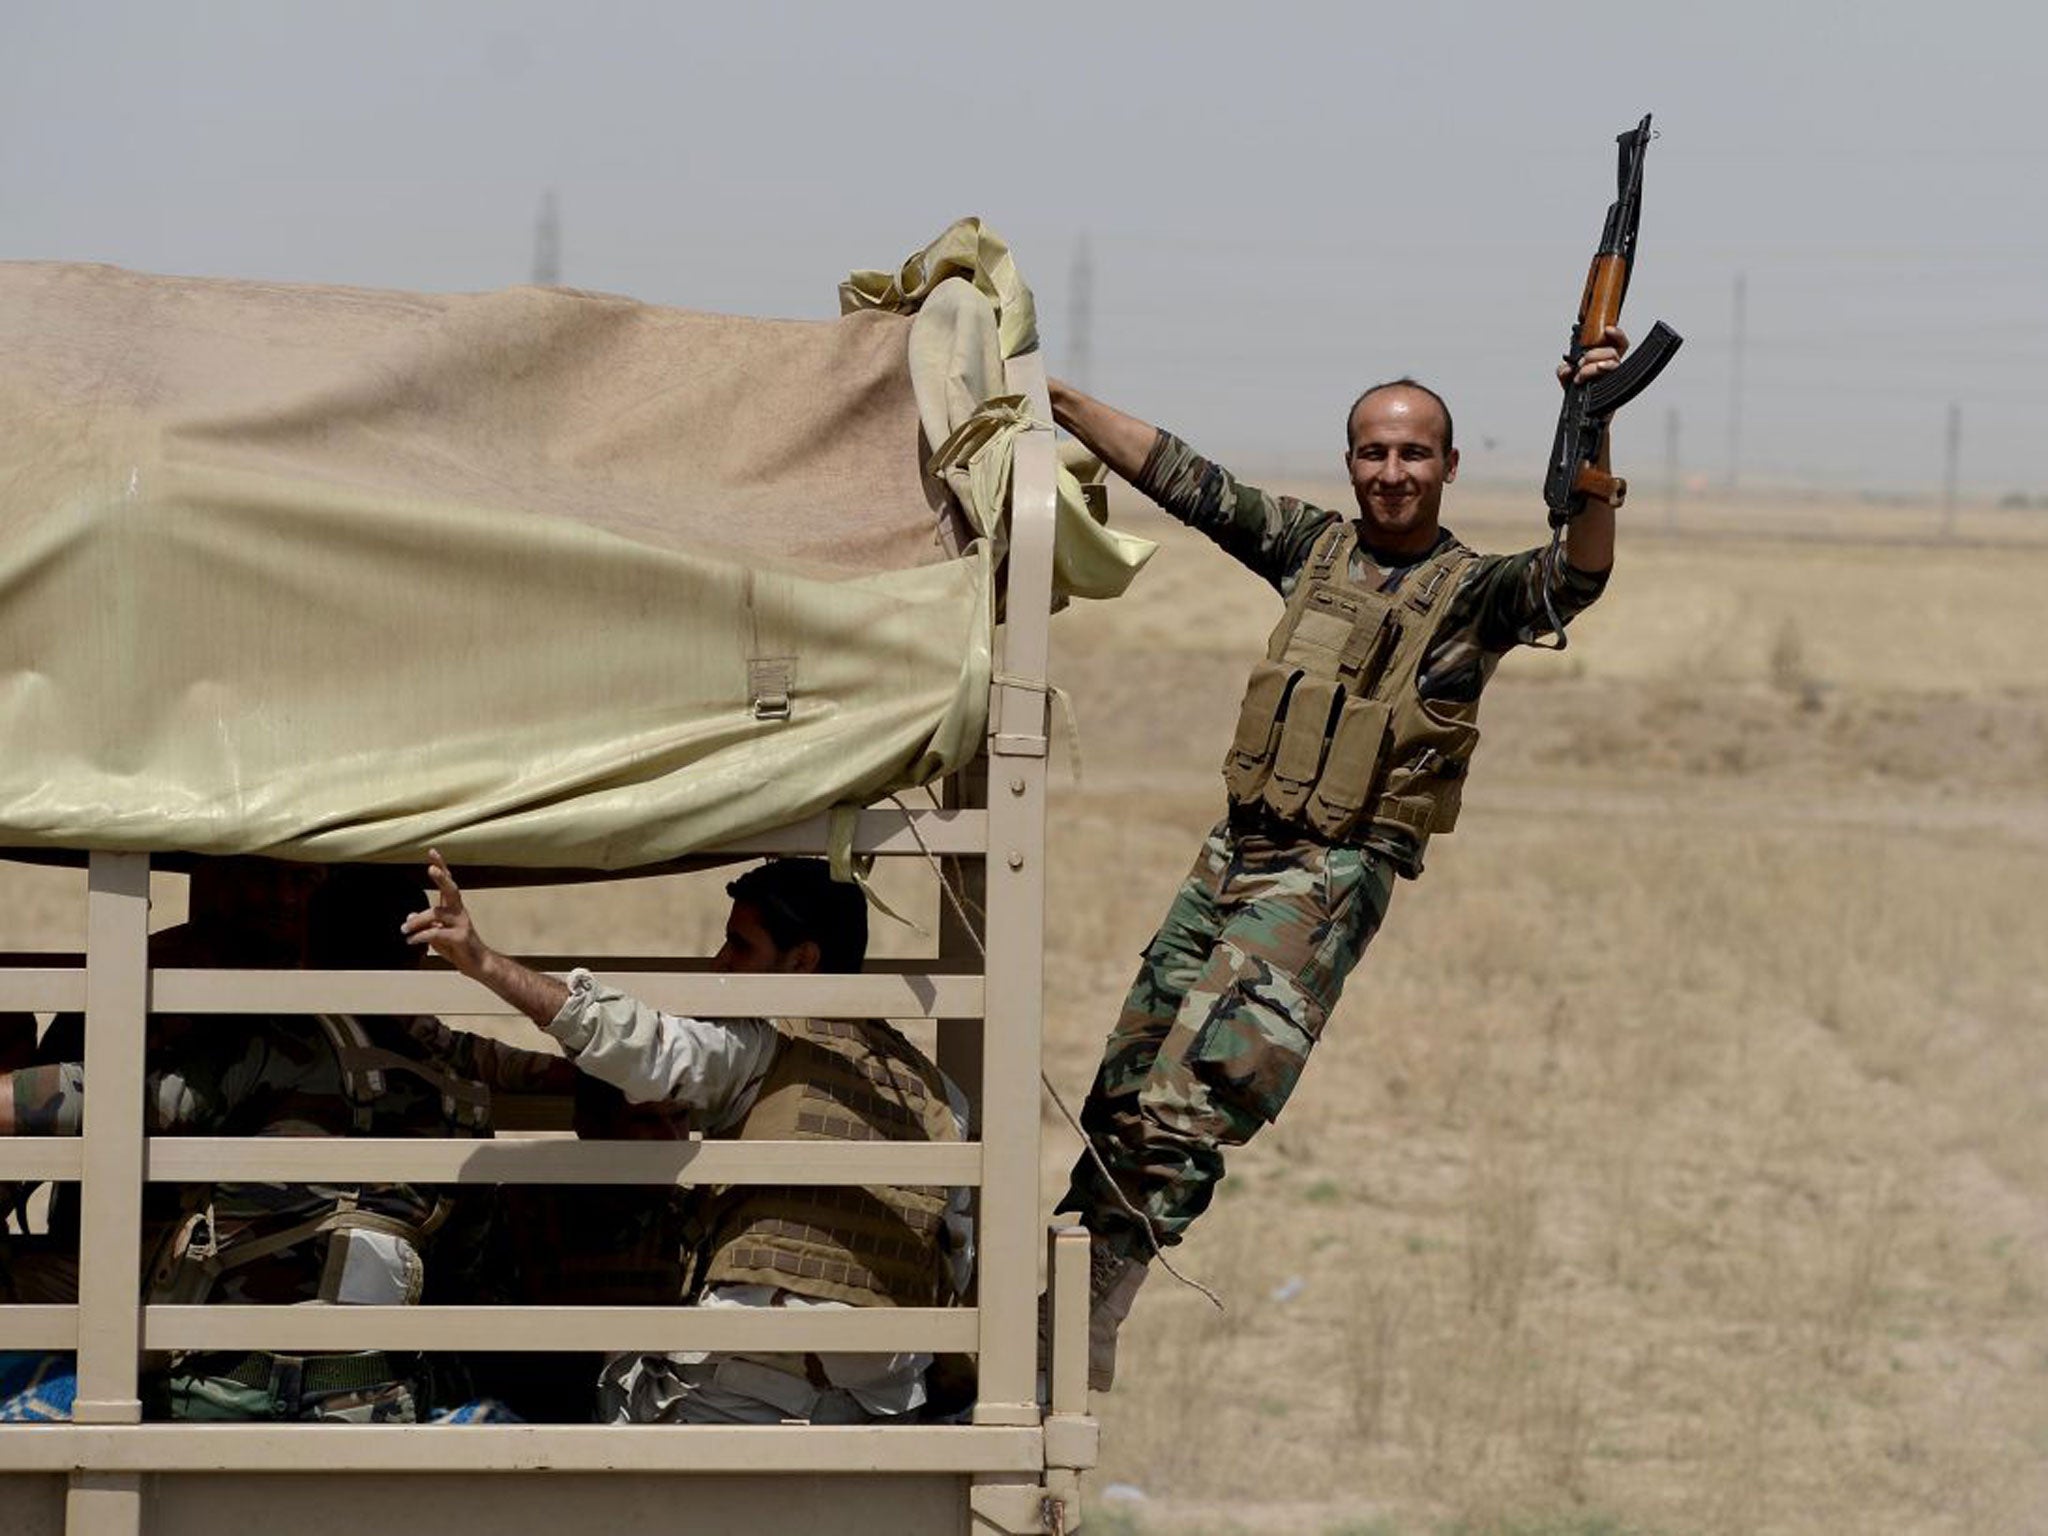 Kurdish Peshmerga forces took control of Kirkuk after it was abandoned by the Iraqi army